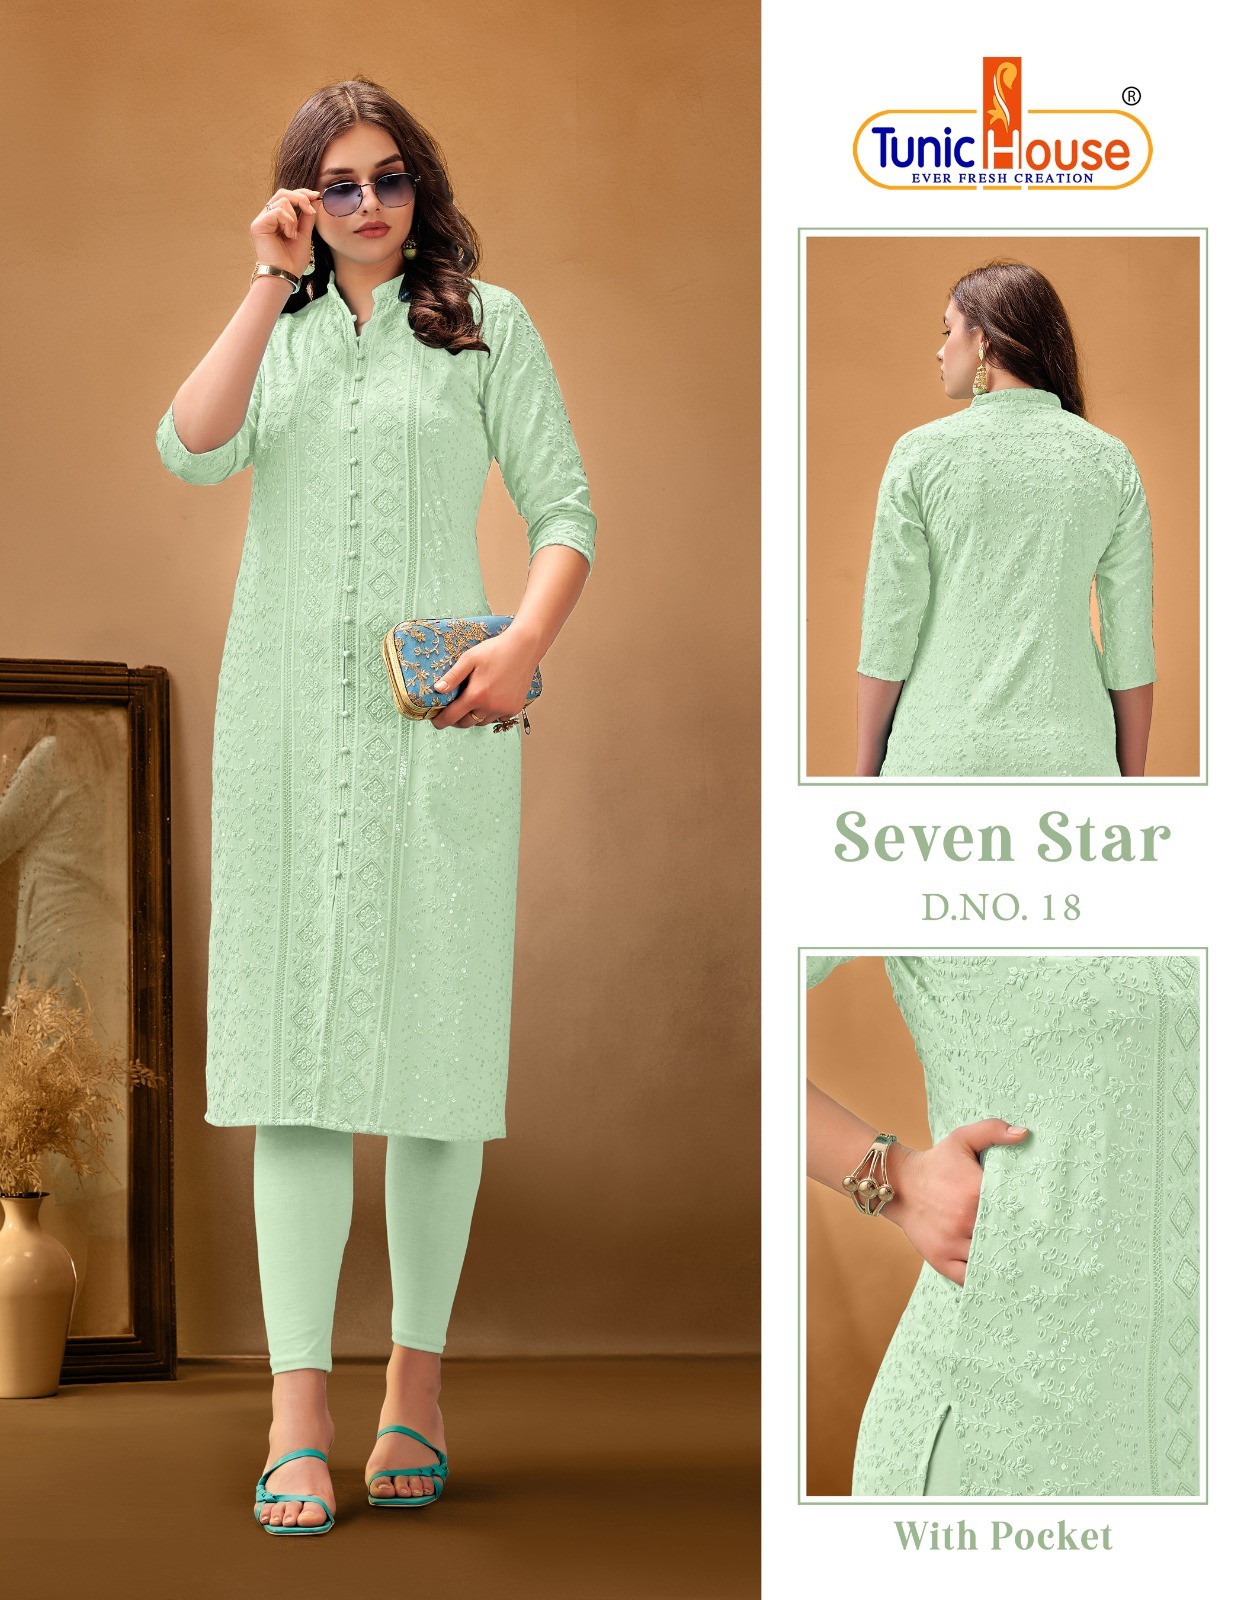 Tunic Houes 7 Star collection 5